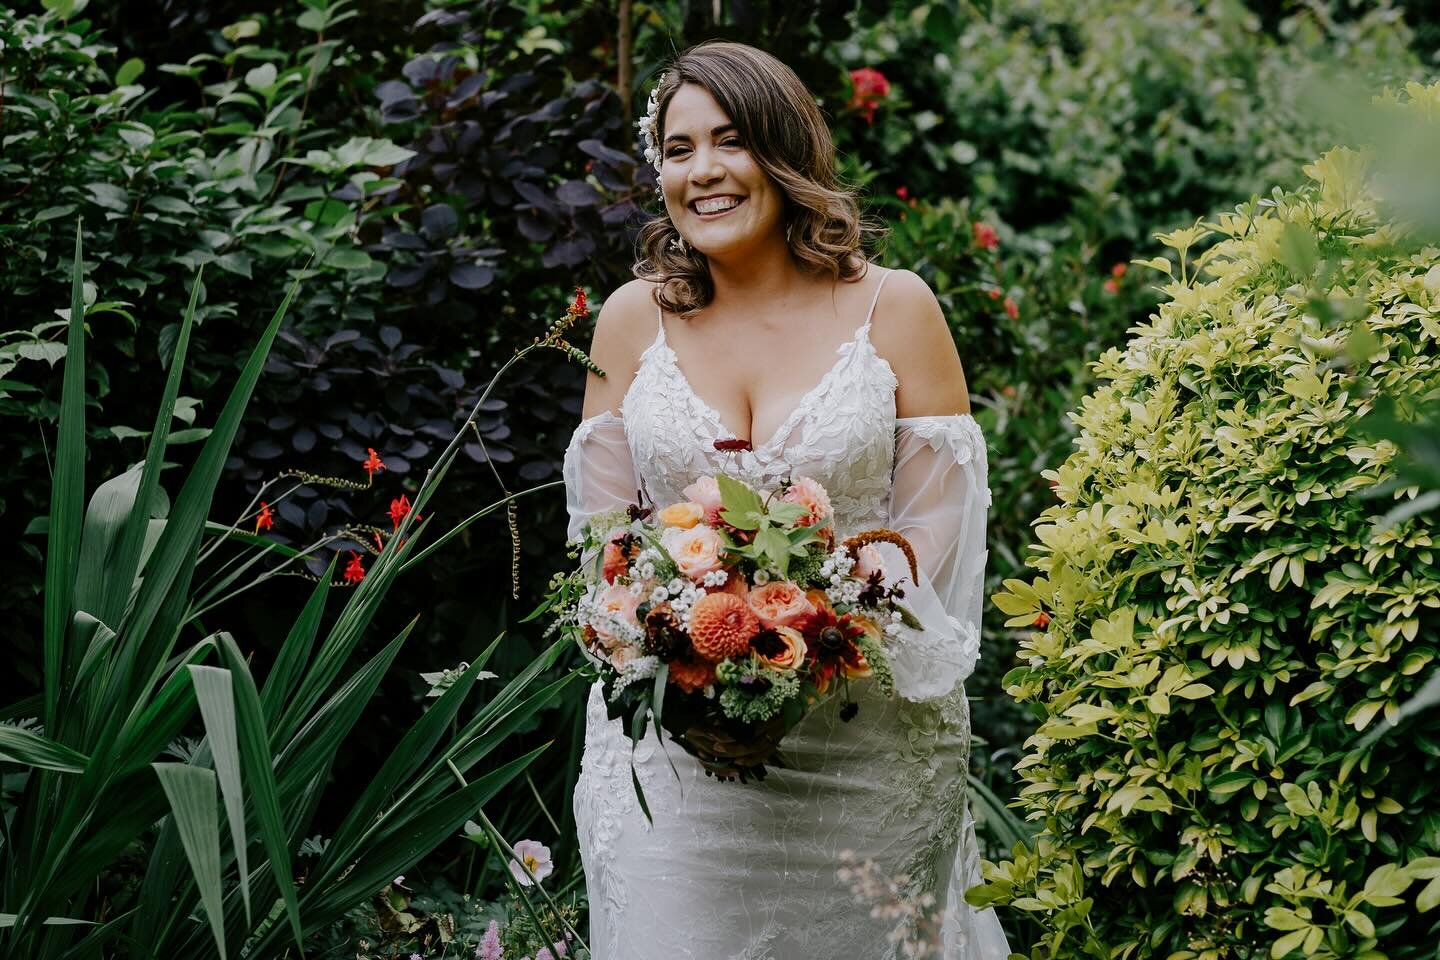 This has to be one of my favourite weddings hence why I continue to share it.  A stunning bride walking up the aisle to marry the one she loves 💞 at the fab @thecoachhousederby. How stunning does Alexa look?  Check out husband to be&rsquo;s smile!  